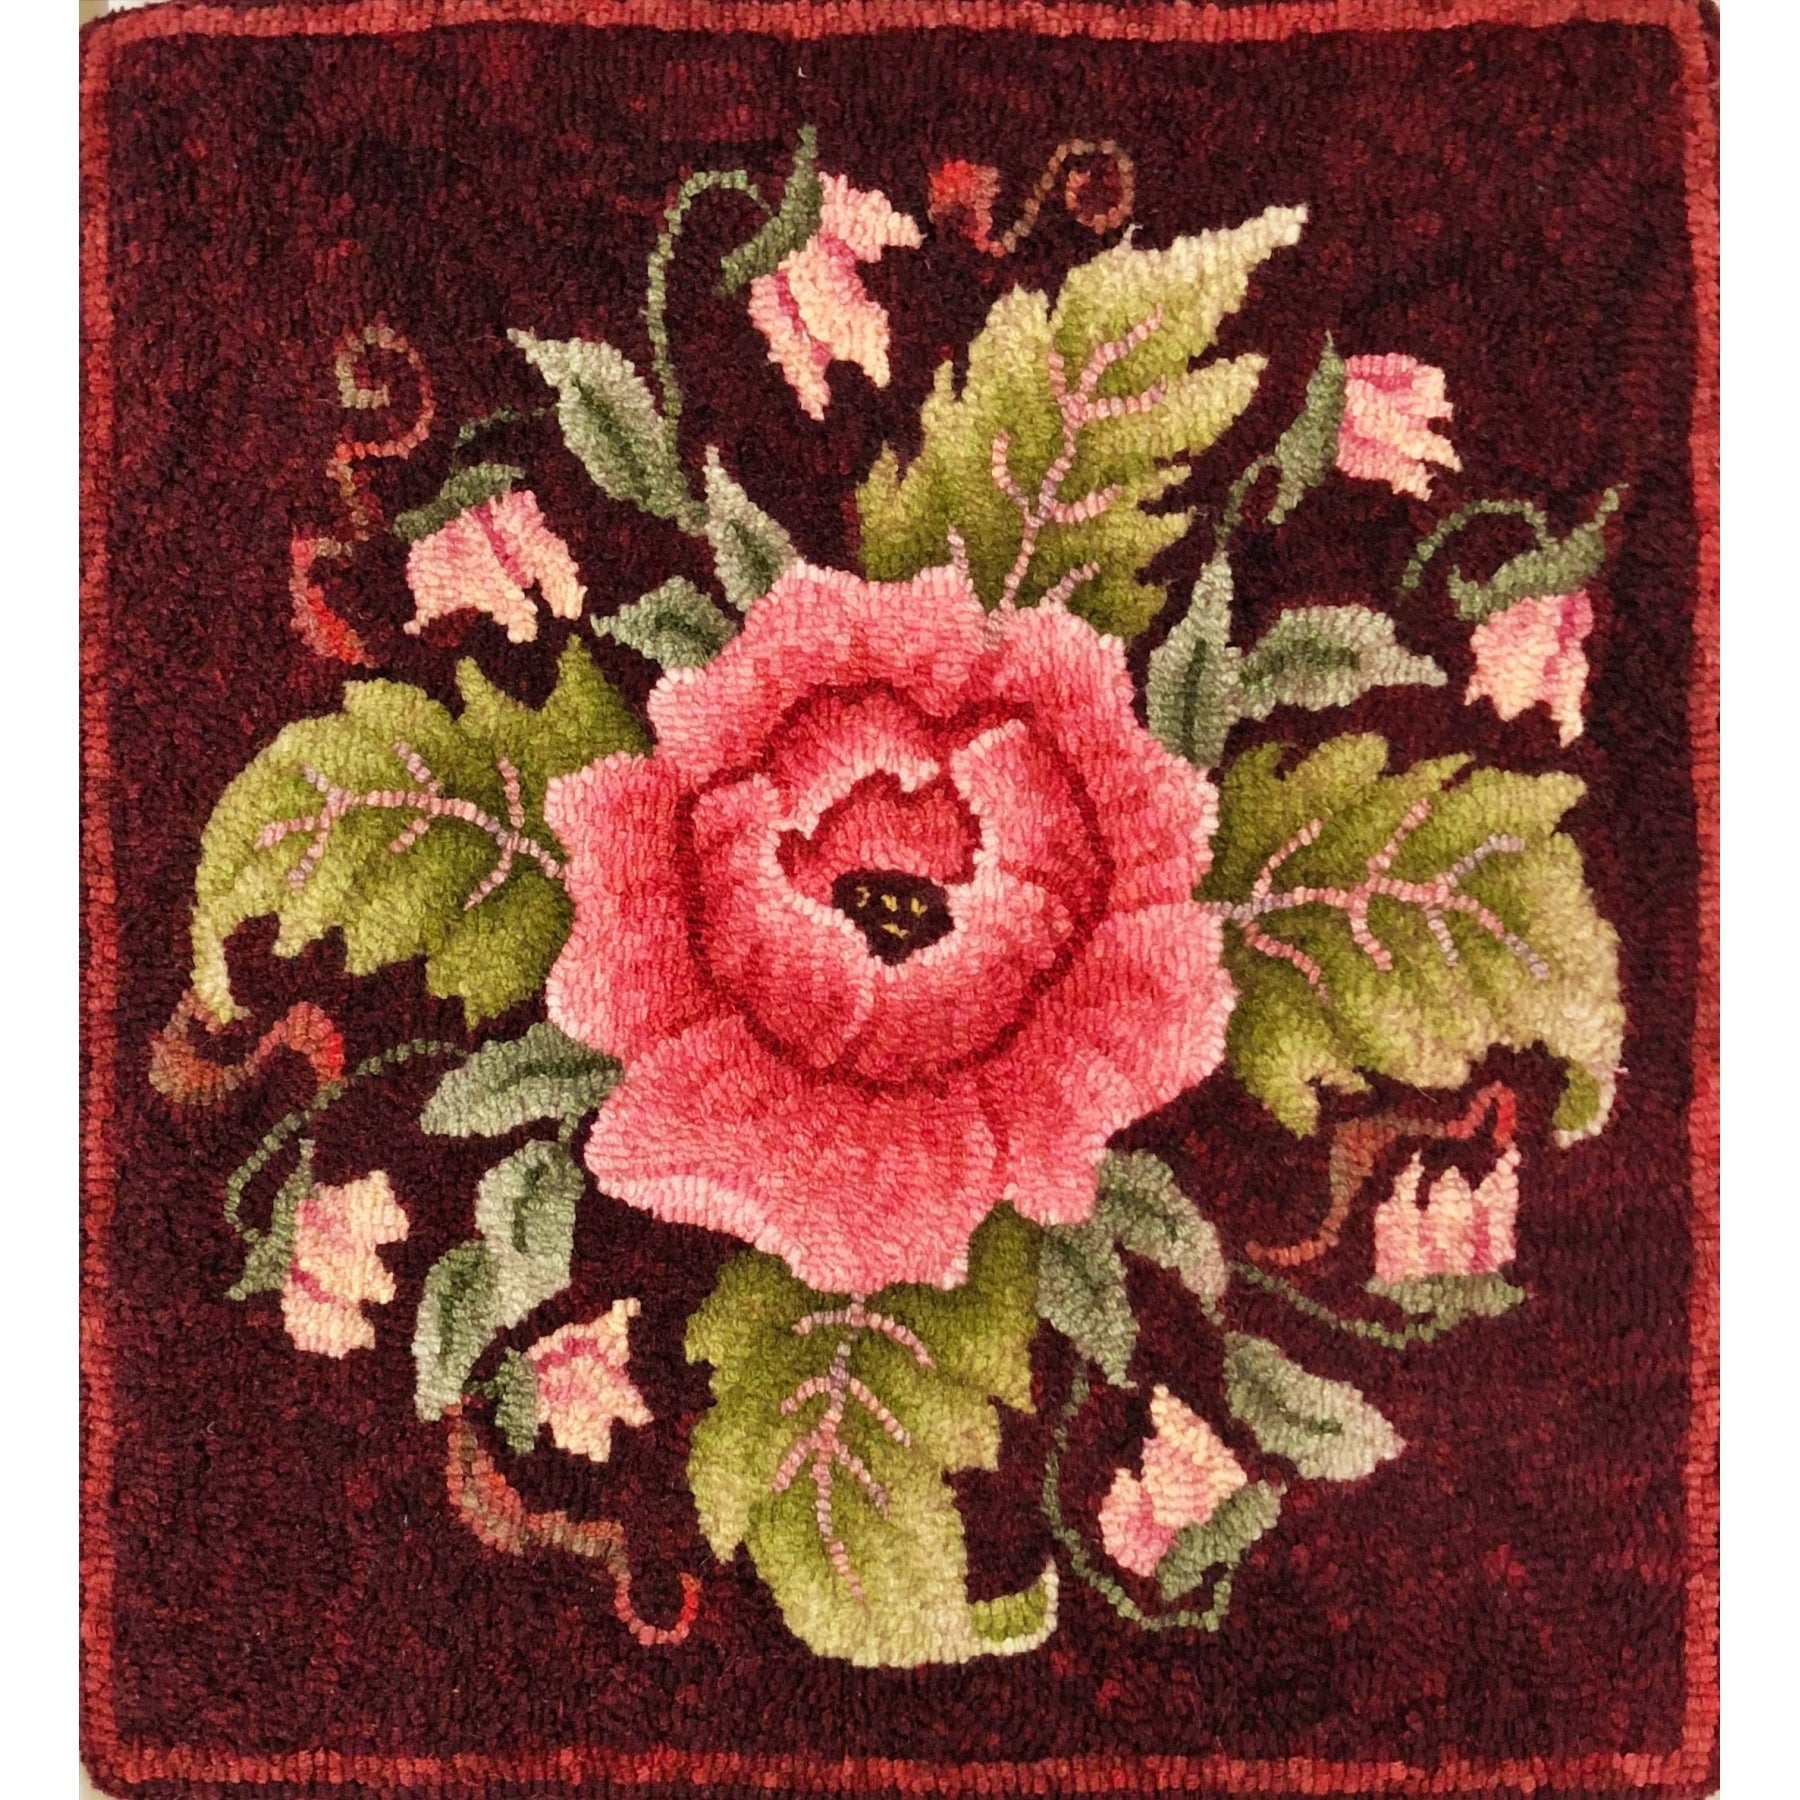 Ruthie Rose, rug hooked by Ruth Downing